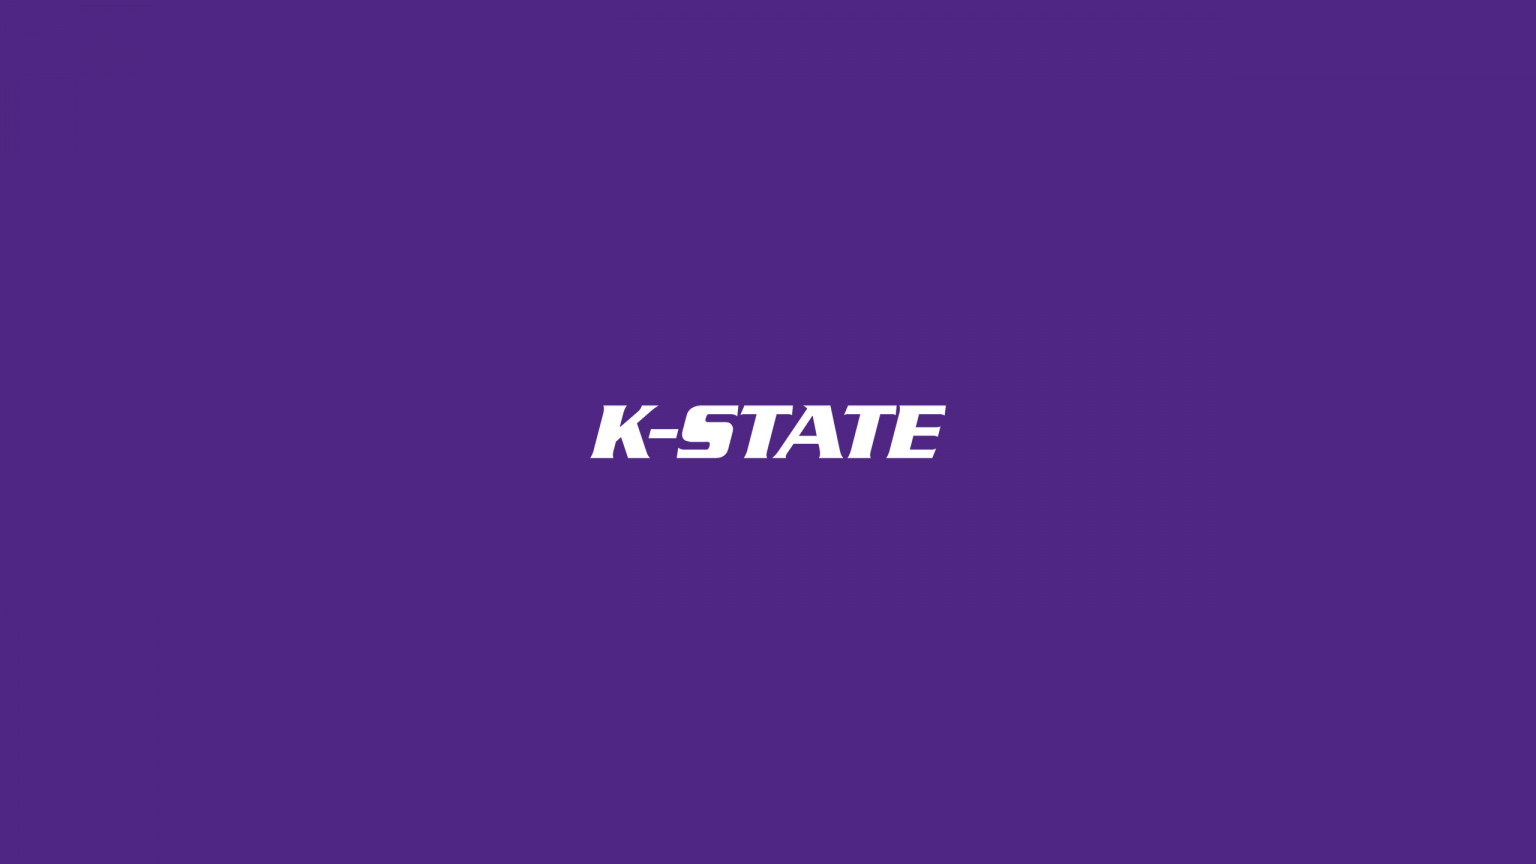 Kansas State Wildcats Basketball - NCAAB - Square Bettor